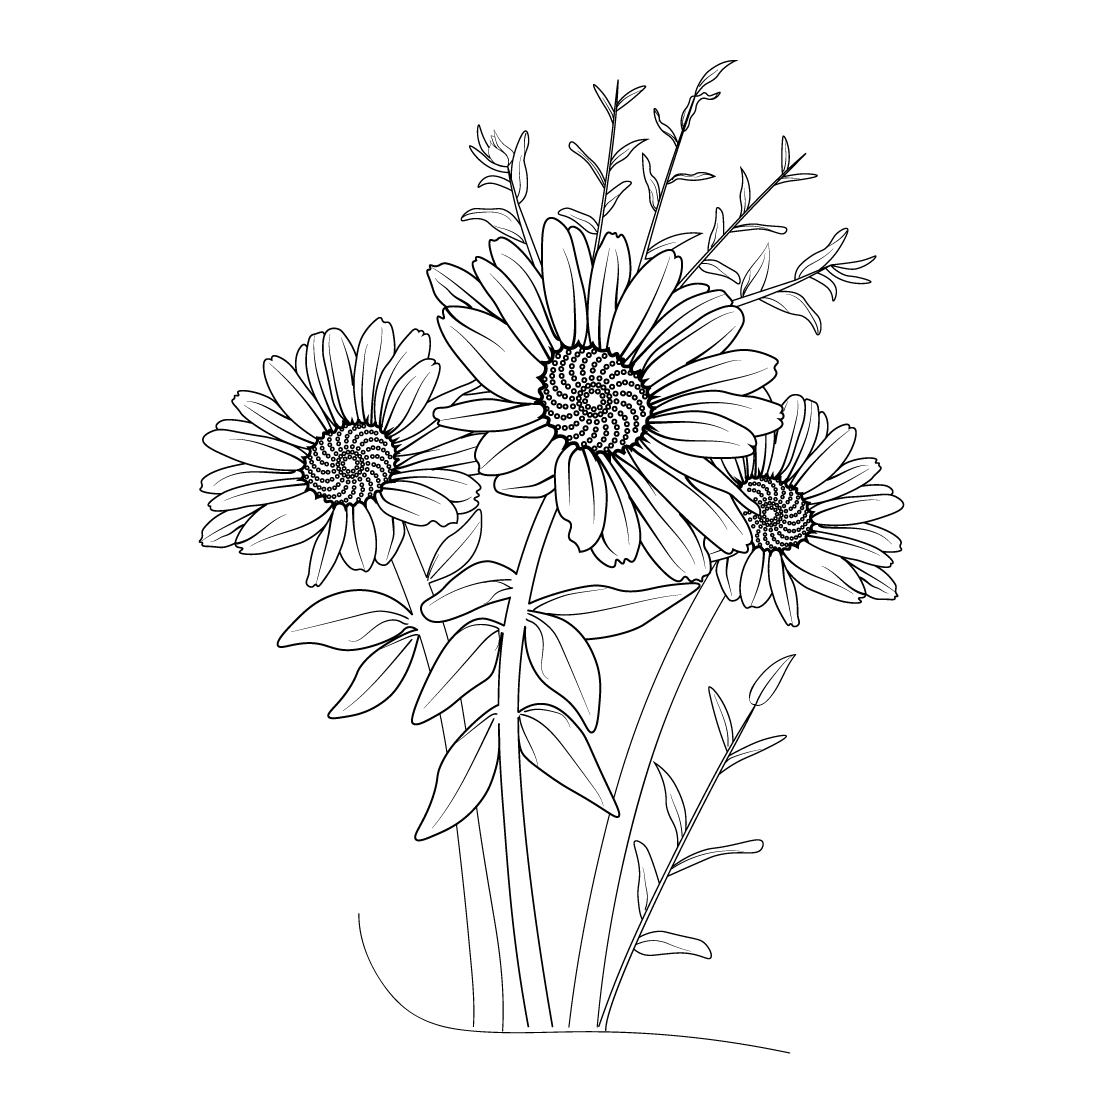 Pencil realistic daisy flower drawing. simple daisy line drawing, daisy